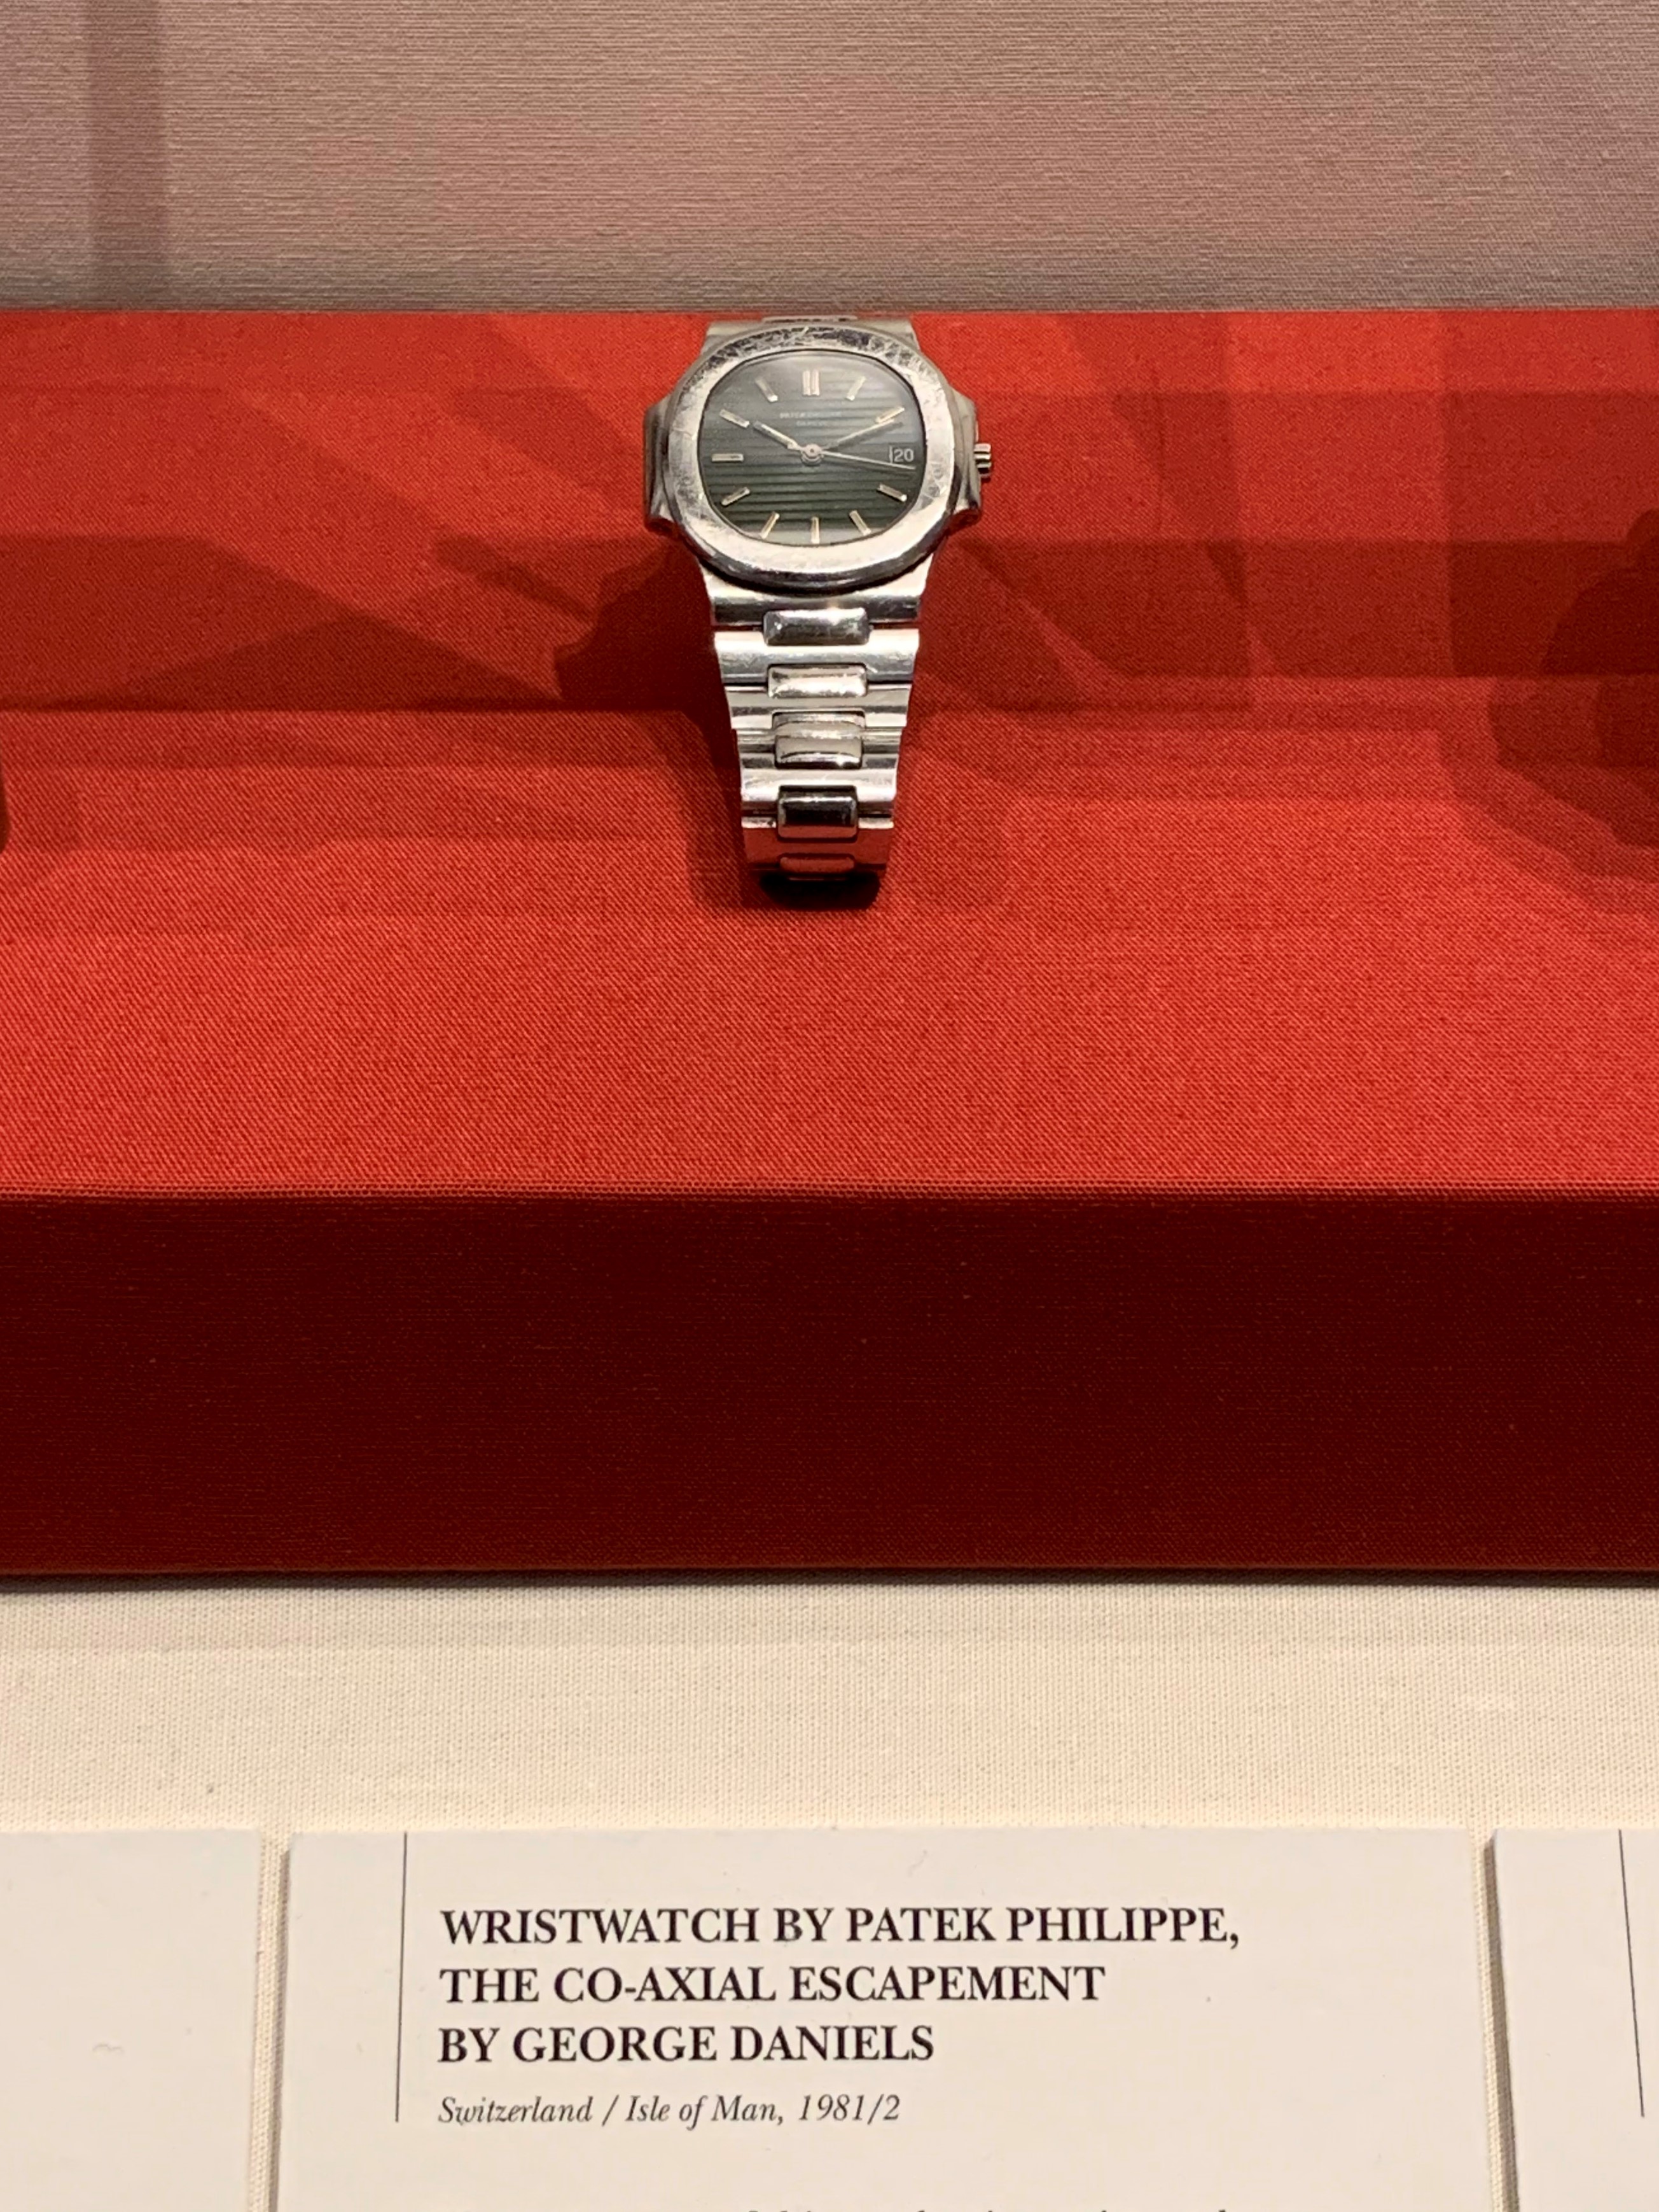 Dr George Daniels’ Patek Philippe Nautilus, the oldest co-axial wristwatch in the world at the Clockmakers Museum, London